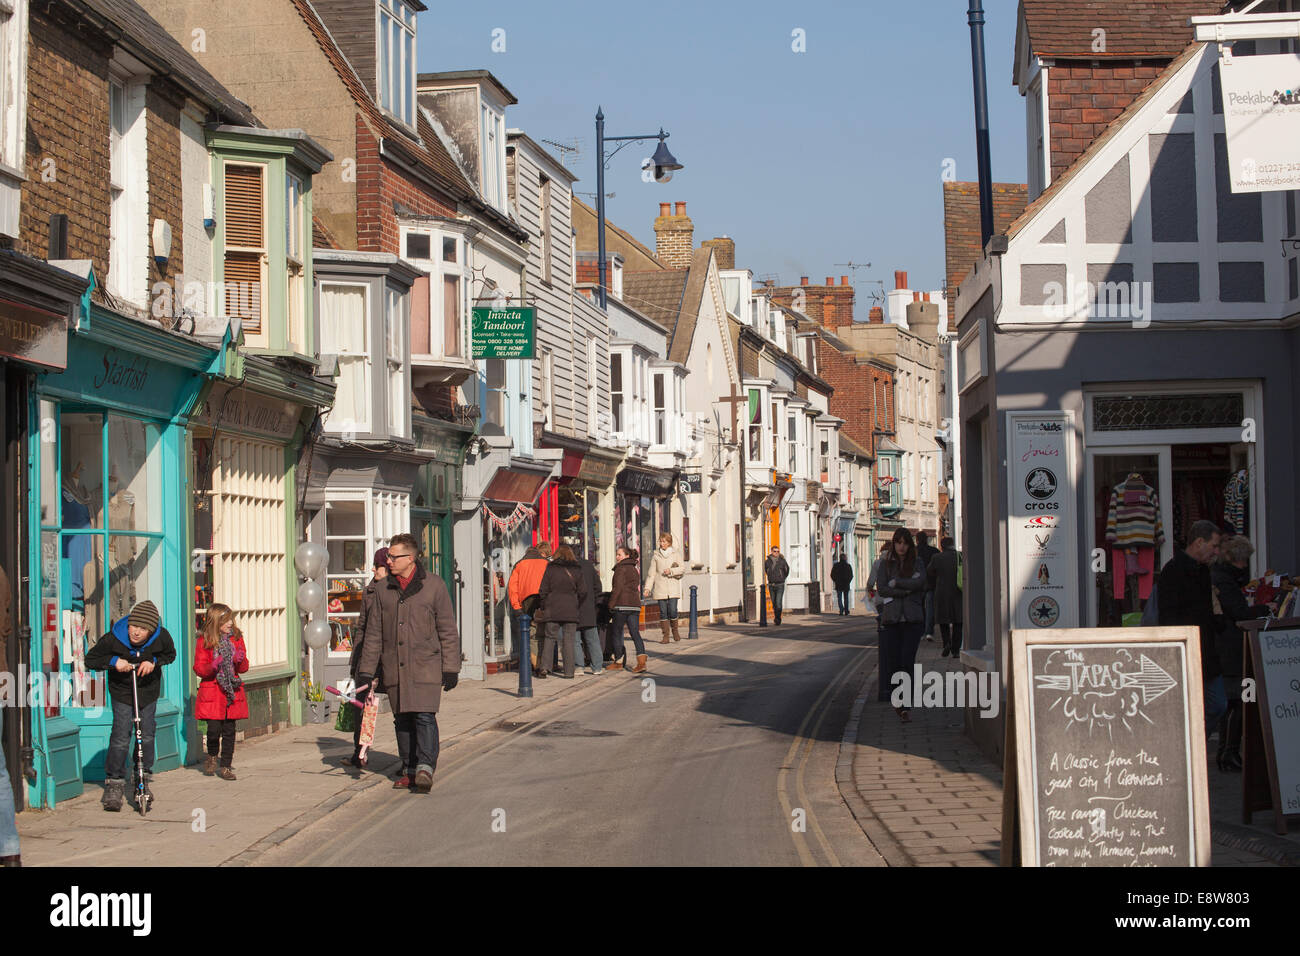 The-high-street-Whitstable-Kent-England-